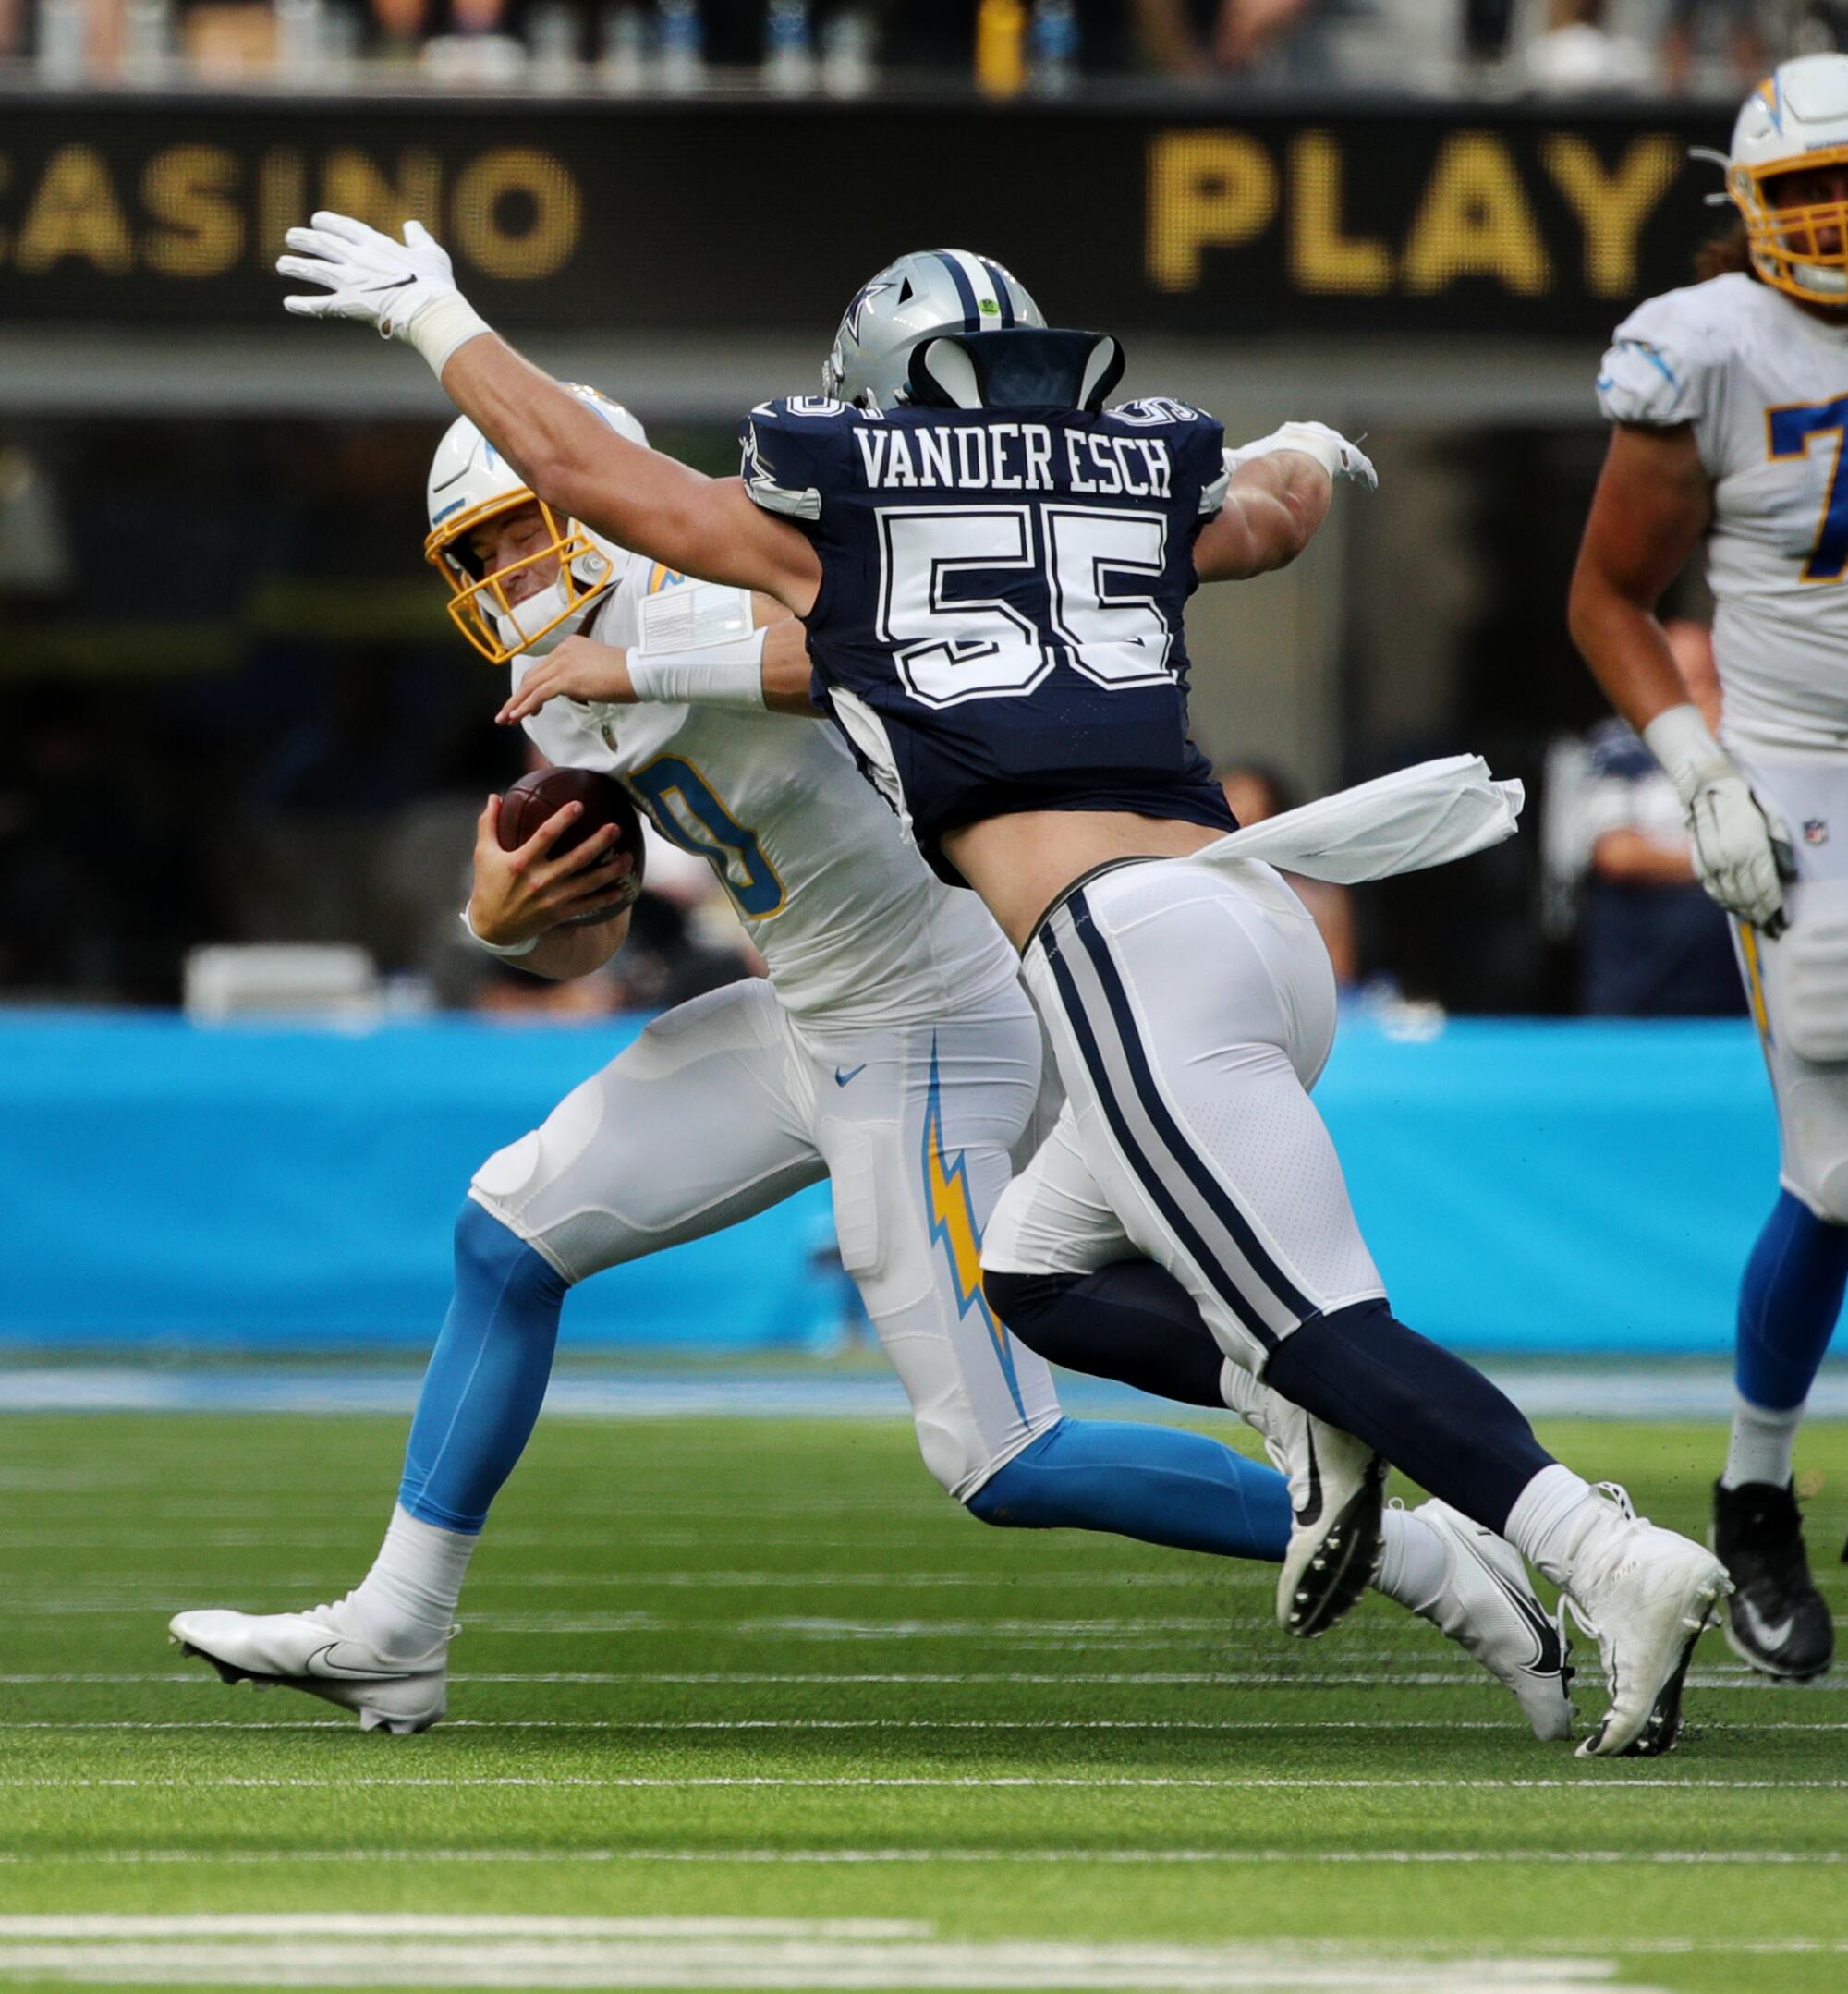 Chargers quarterback Justin Herbert is chased and sacked by Dallas Cowboys outside linebacker Leighton Vander Esch.